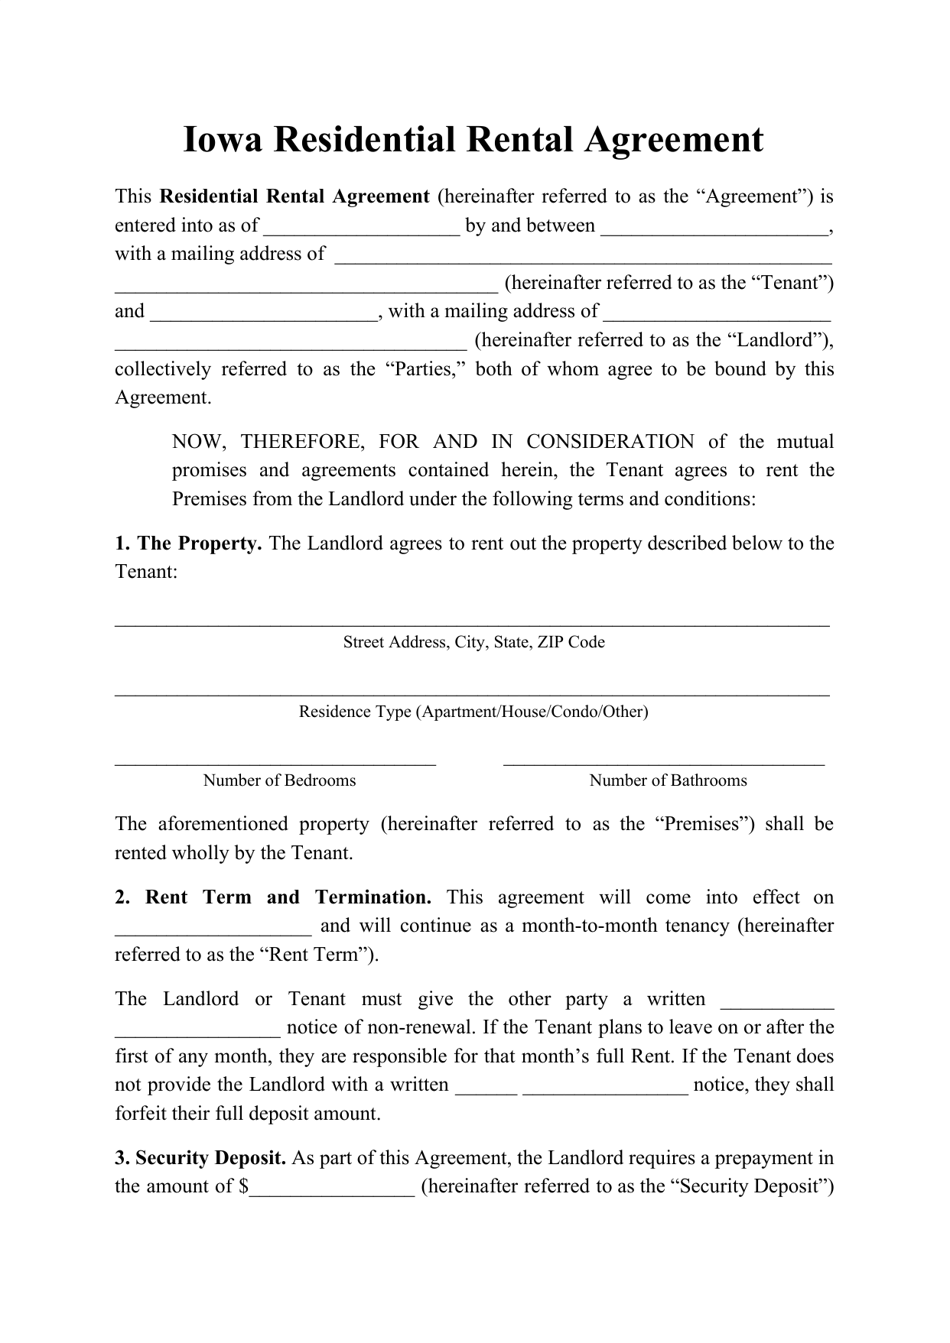 Residential Rental Agreement Template - Iowa, Page 1